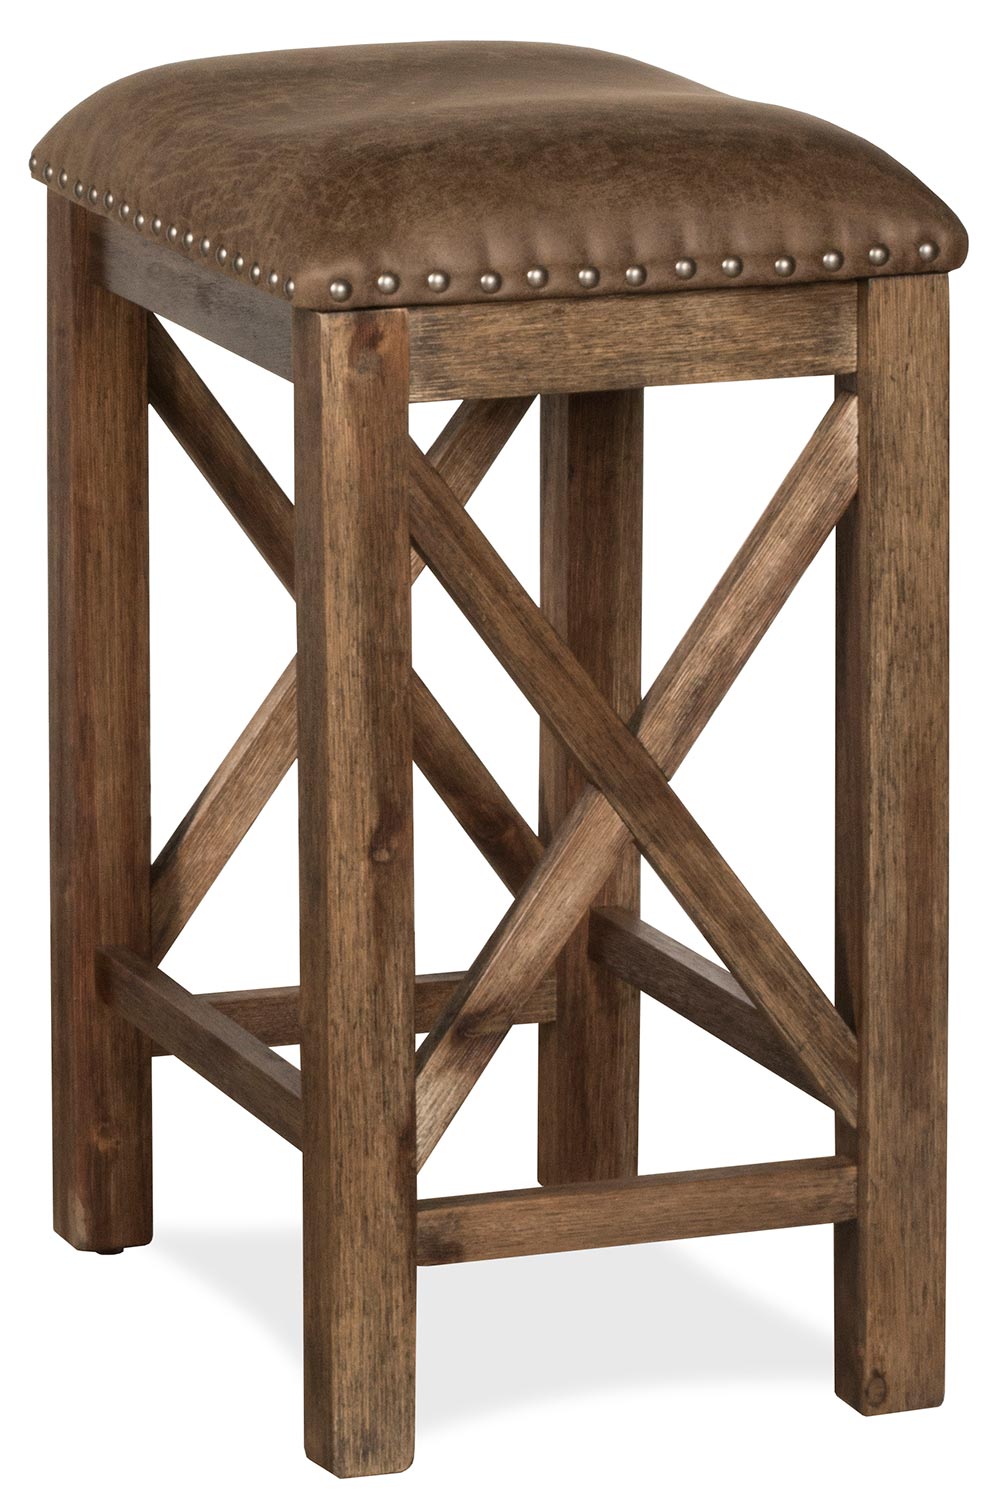 Hillsdale Willow Bend Wood Backless Counter Height Stool - Set of 2 - Antique Brown Walnut